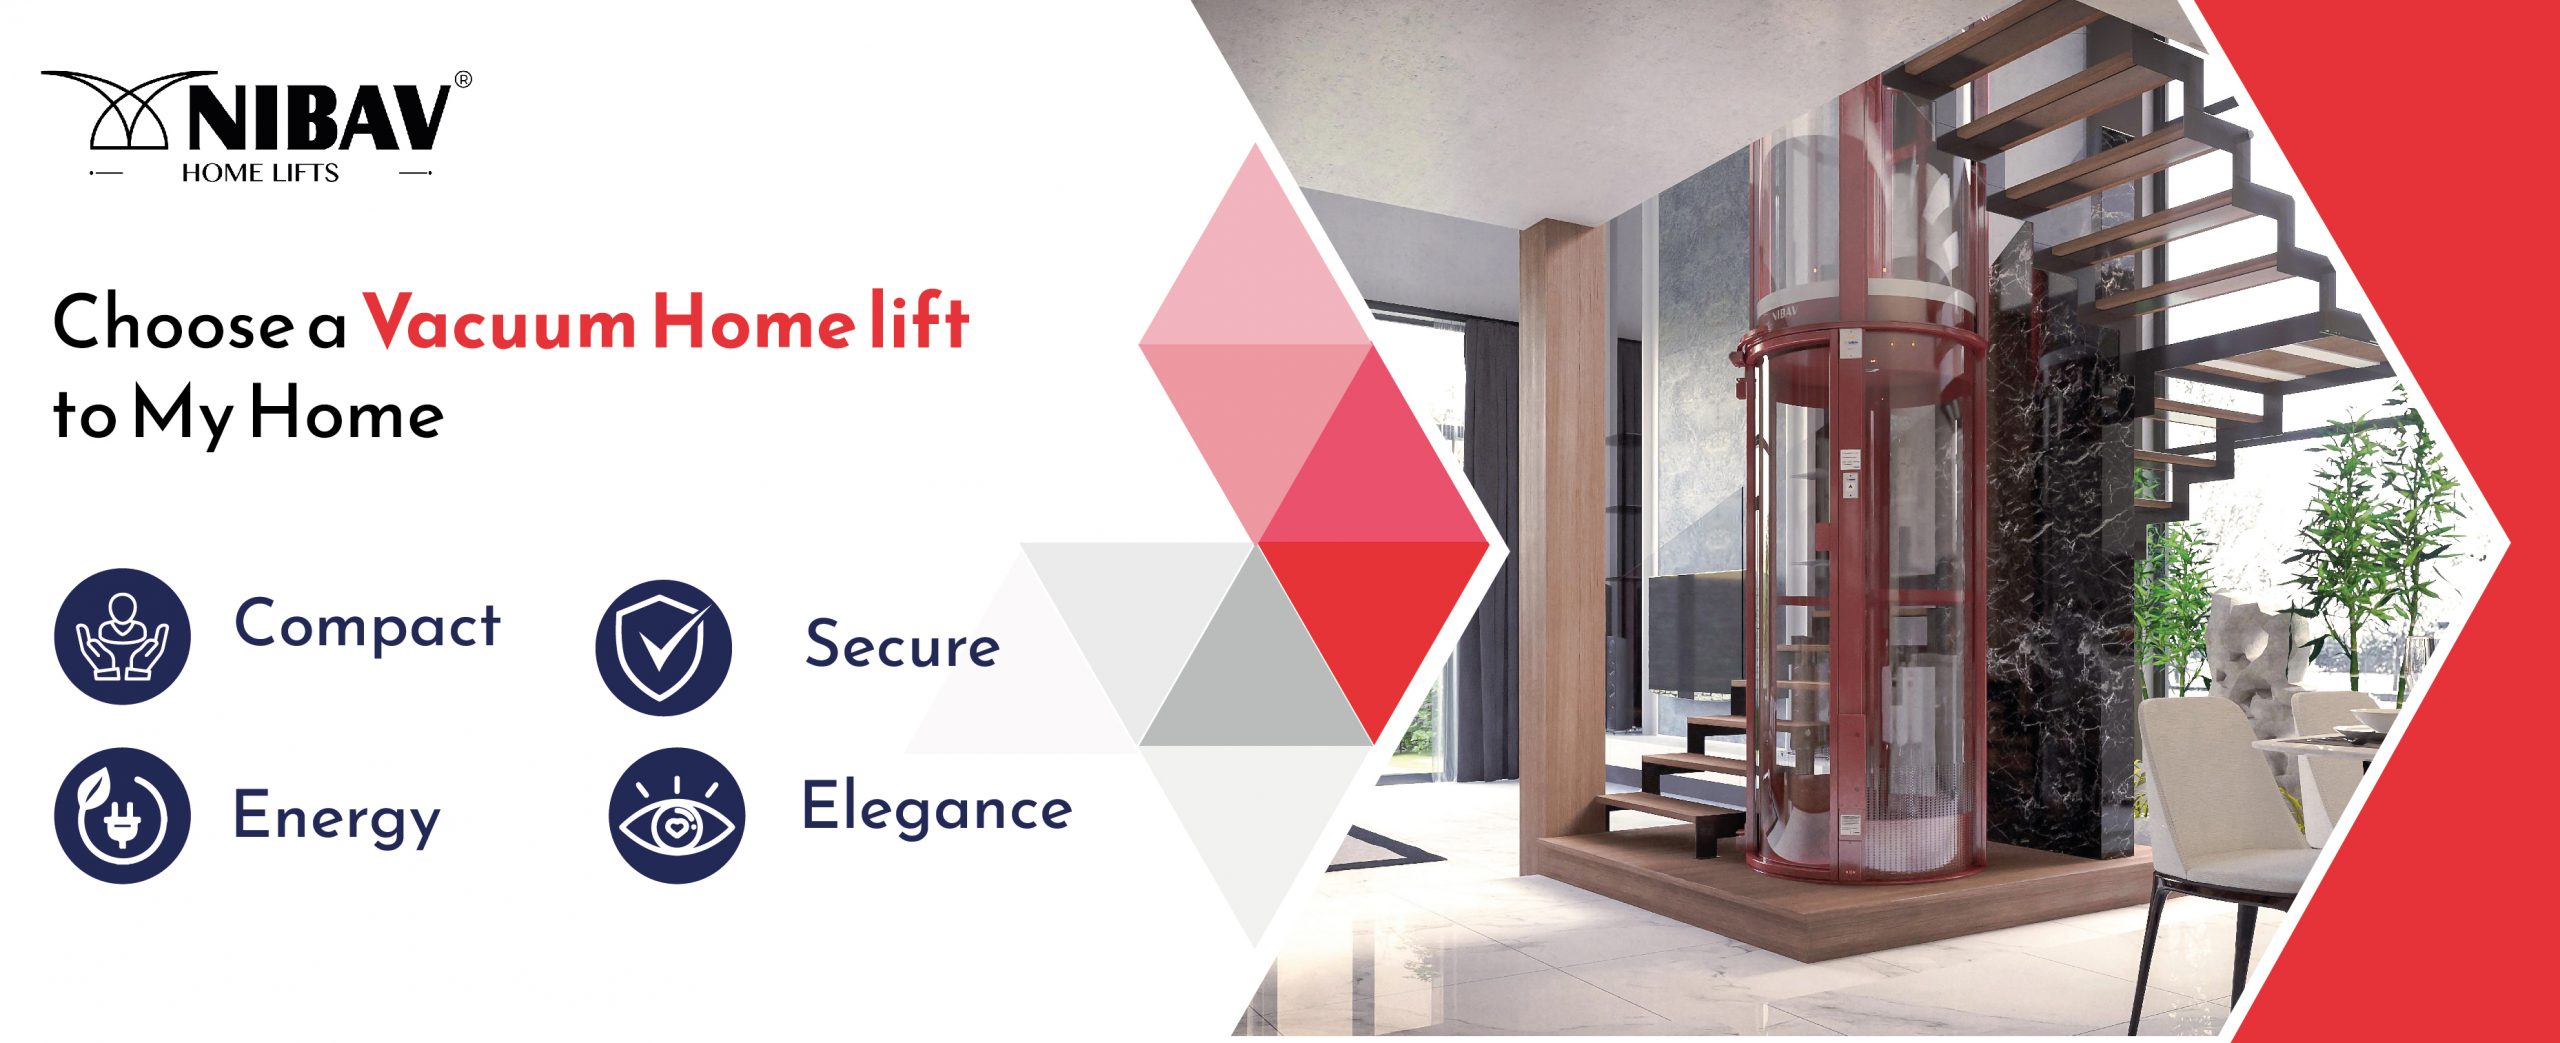 Choose a Vacuum Home Lift for Home